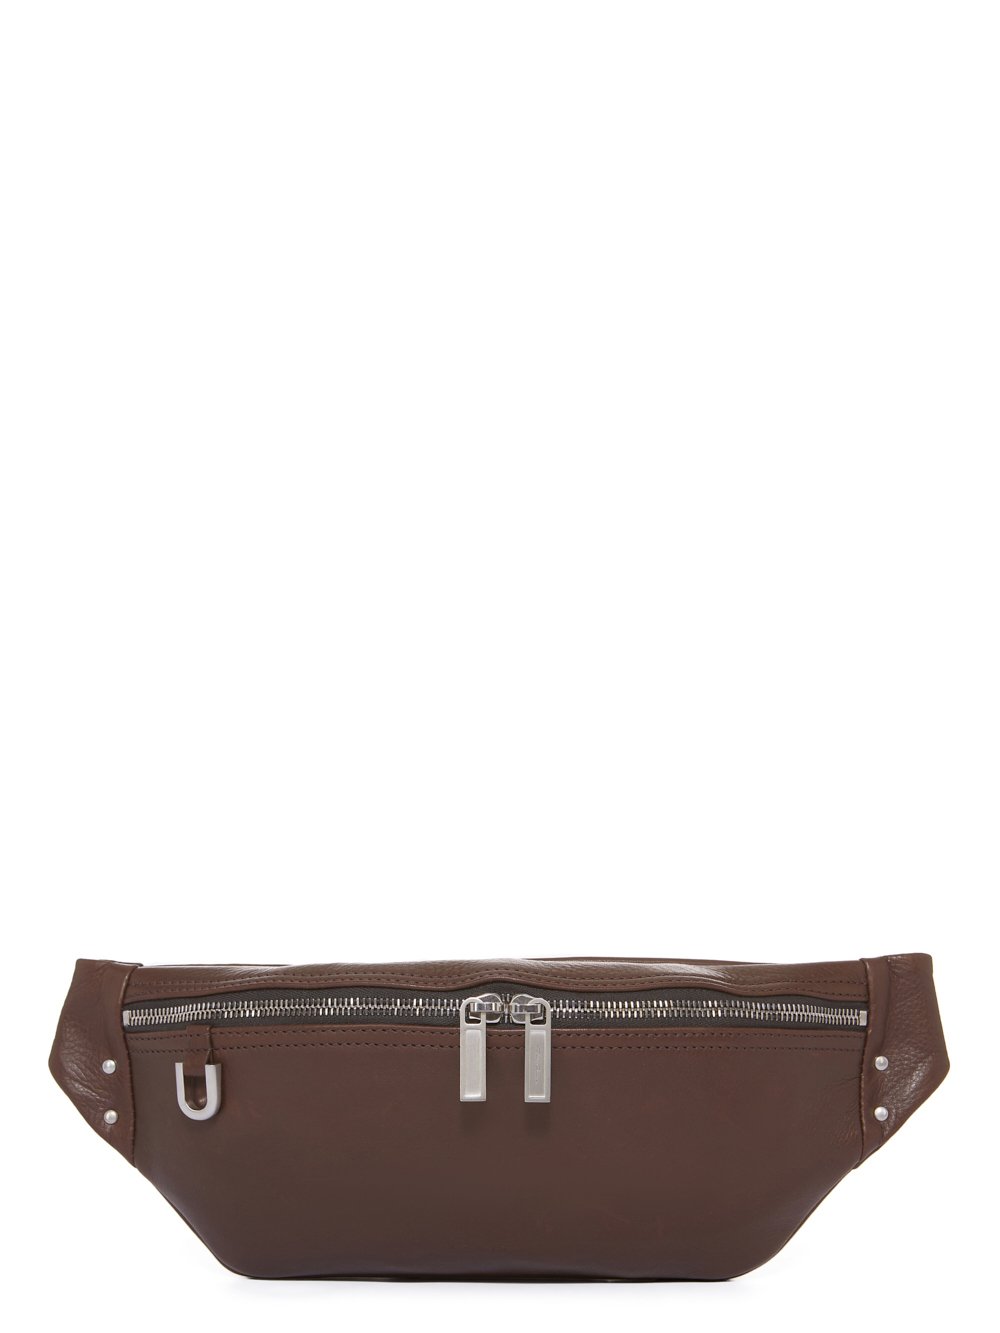 RICK OWENS FW23 LUXOR GEO BUMBAG IN BROWN SOFT GRAIN COW LEATHER